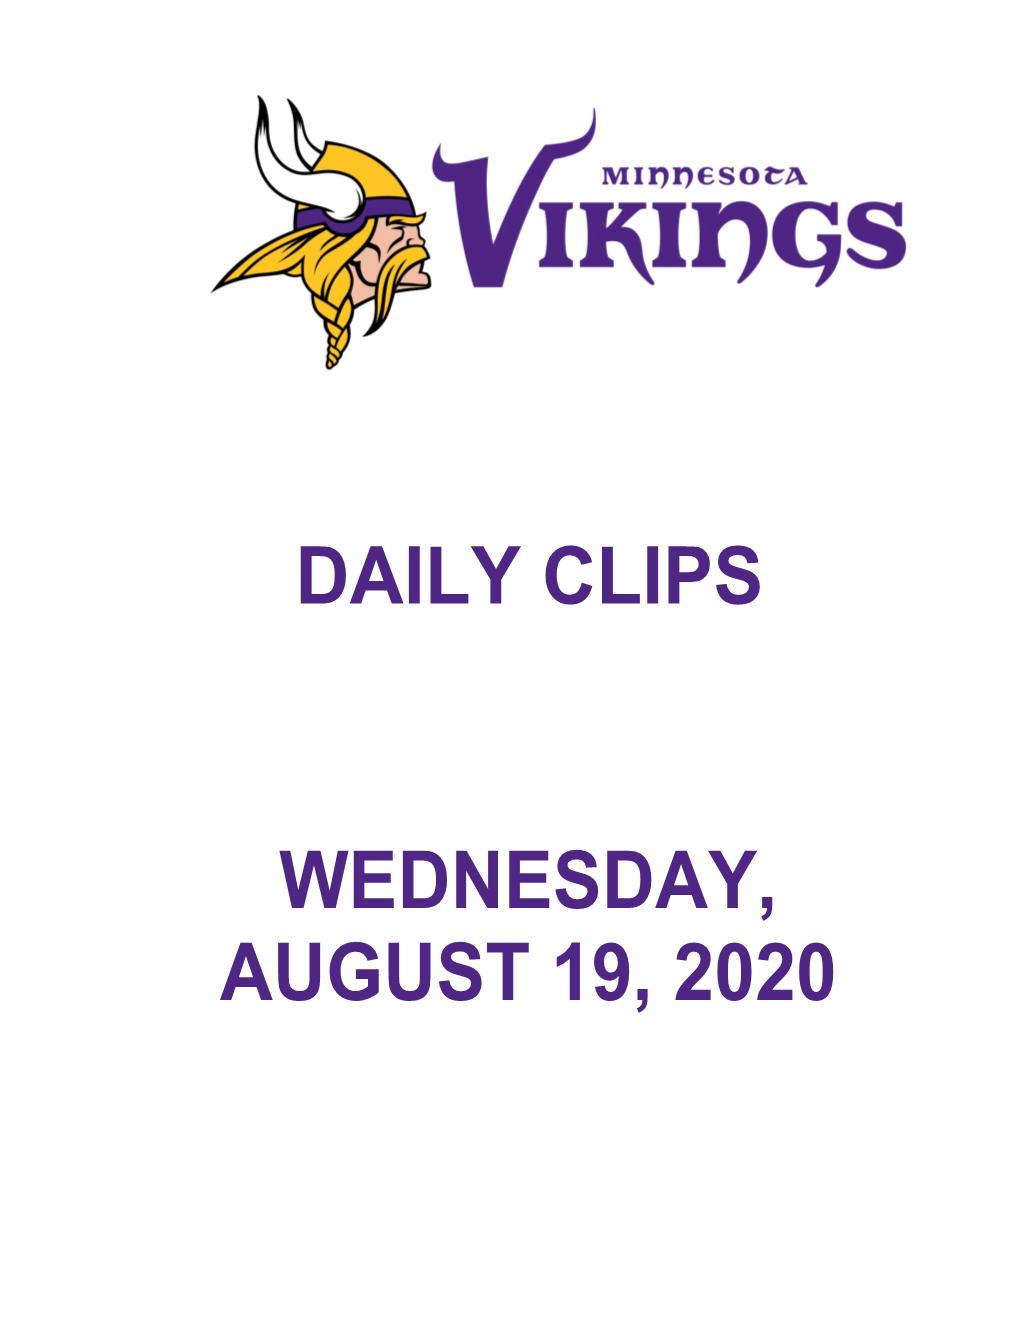 Daily Clips Wednesday, August 19, 2020